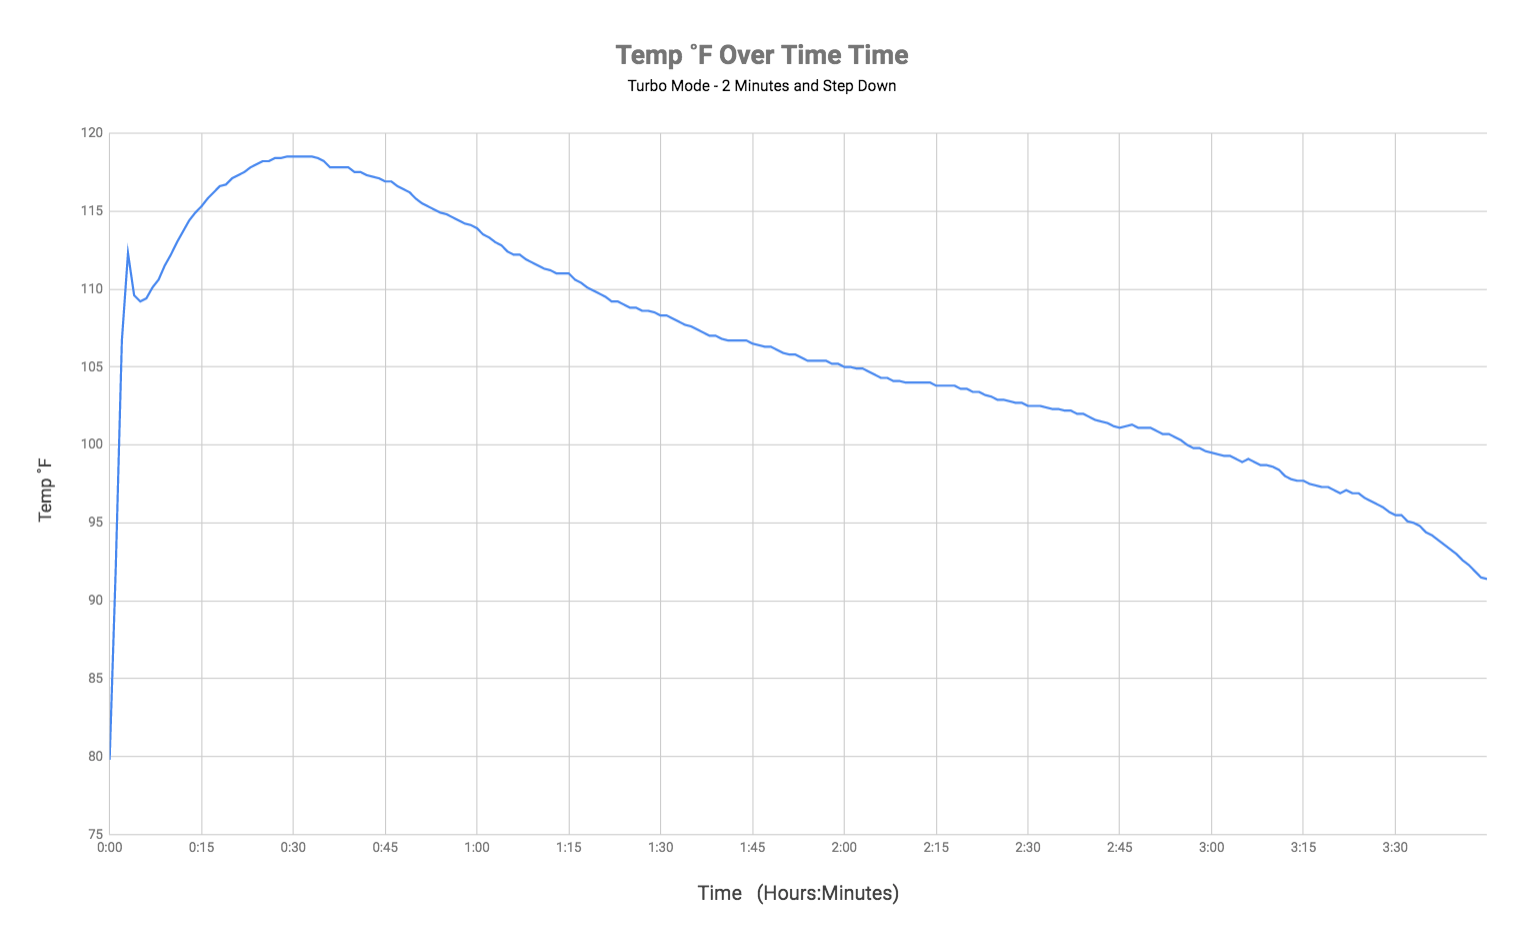 WowTac A7 Temp over Time - Turbo Mode with Step Down